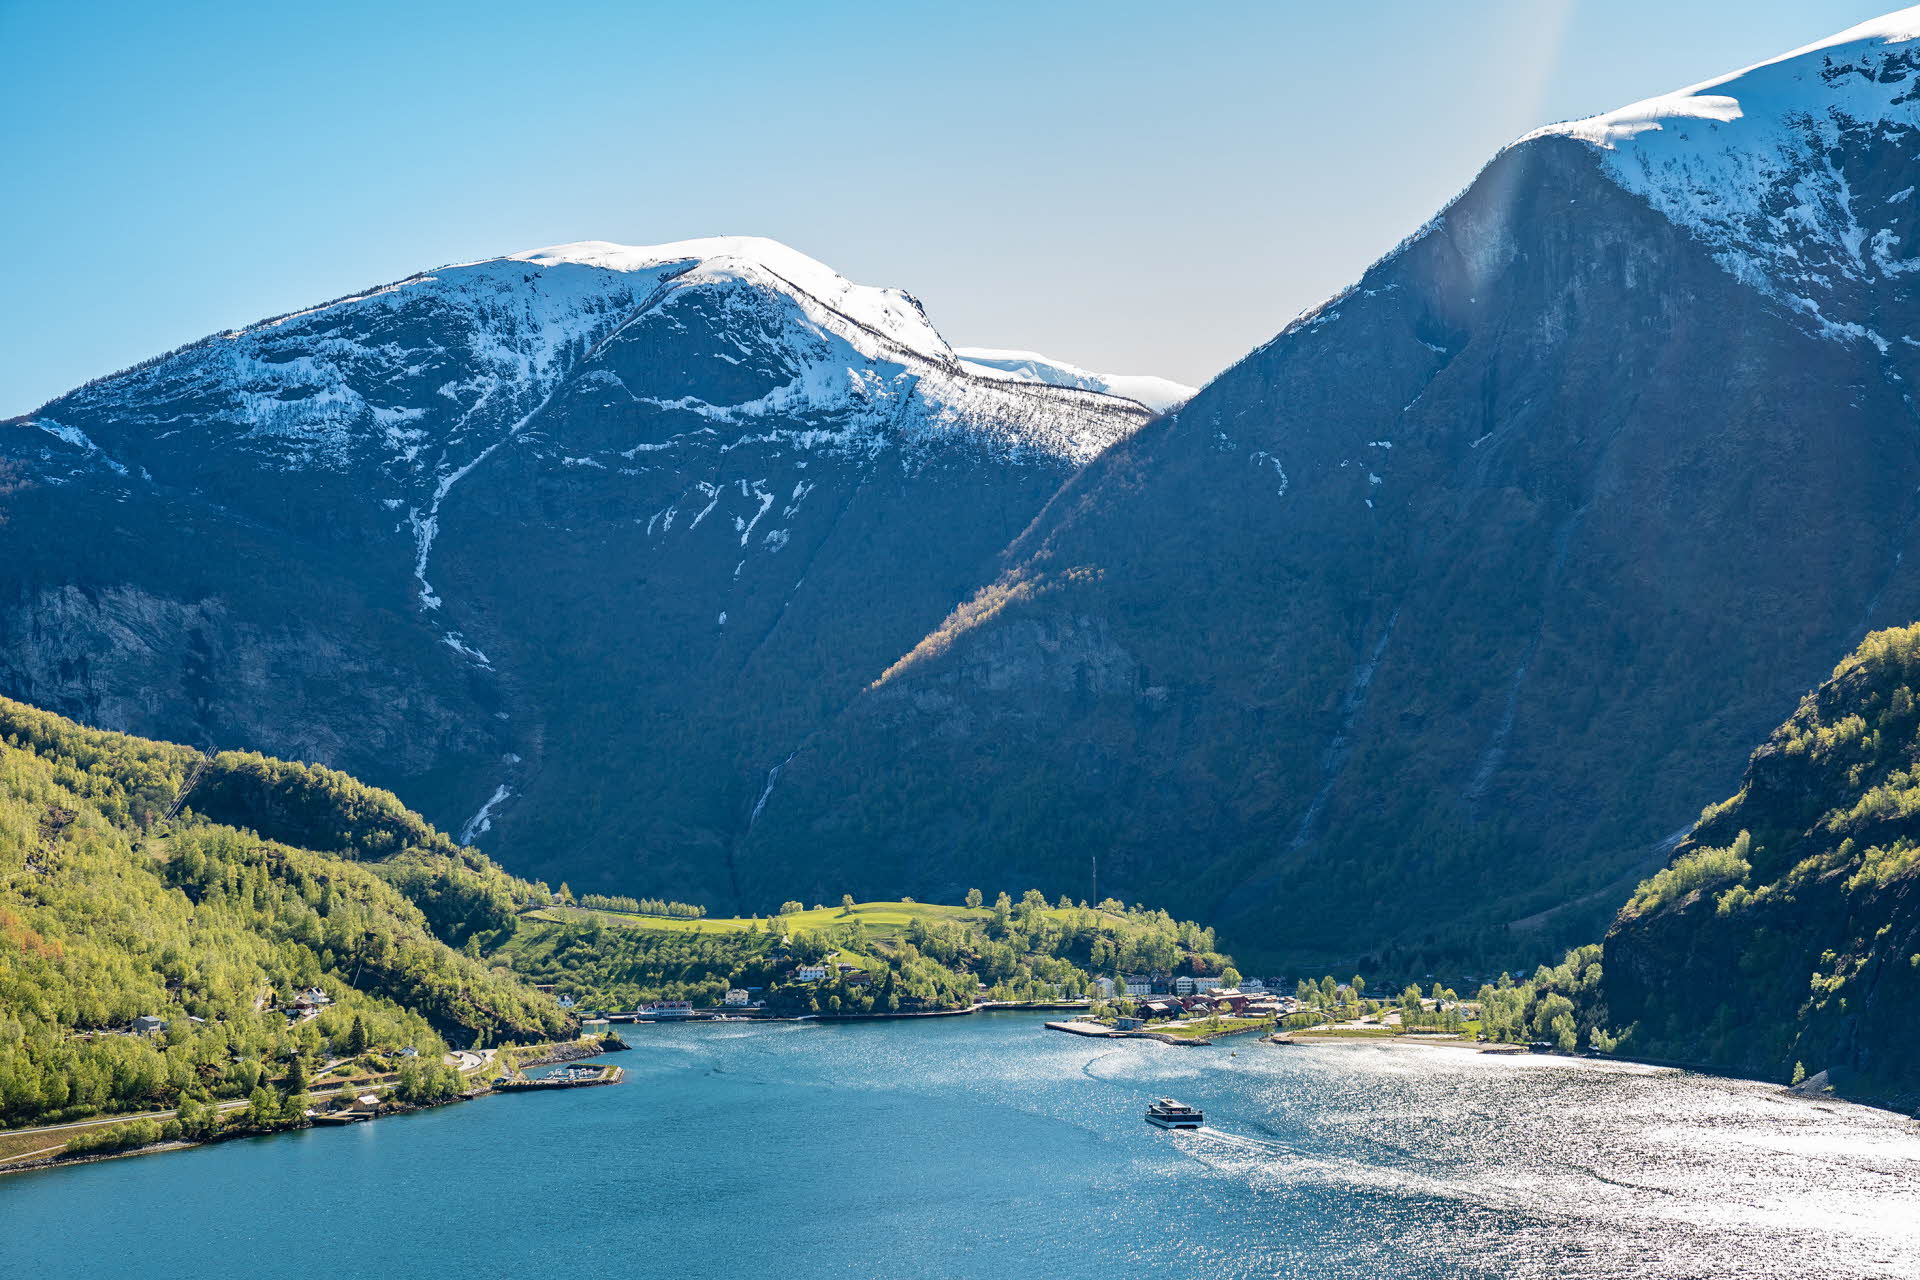 Snow-covered mountains behind Flåm village and a boat sailing on the fjord